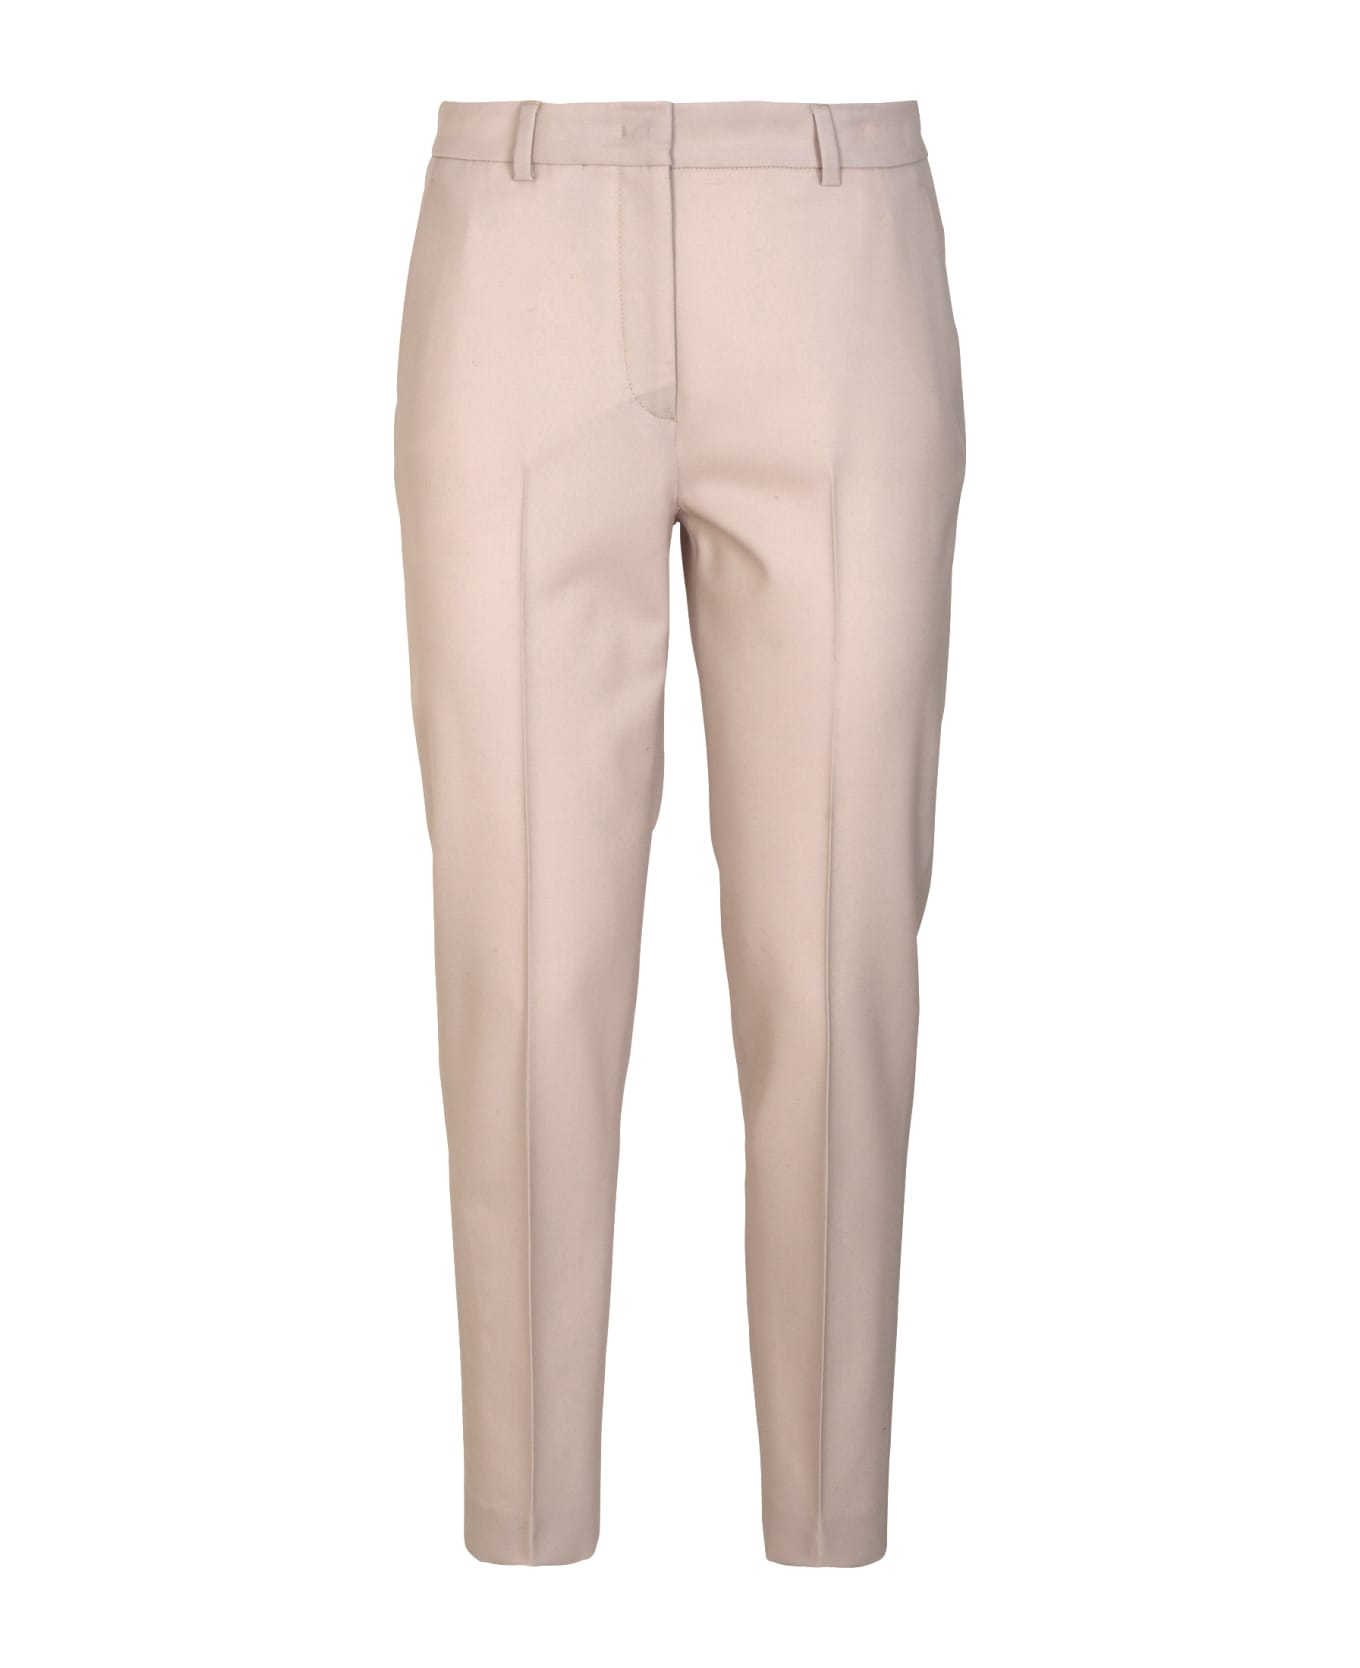 QL2 Concealed Fitted Vervet Trousers - Canvas